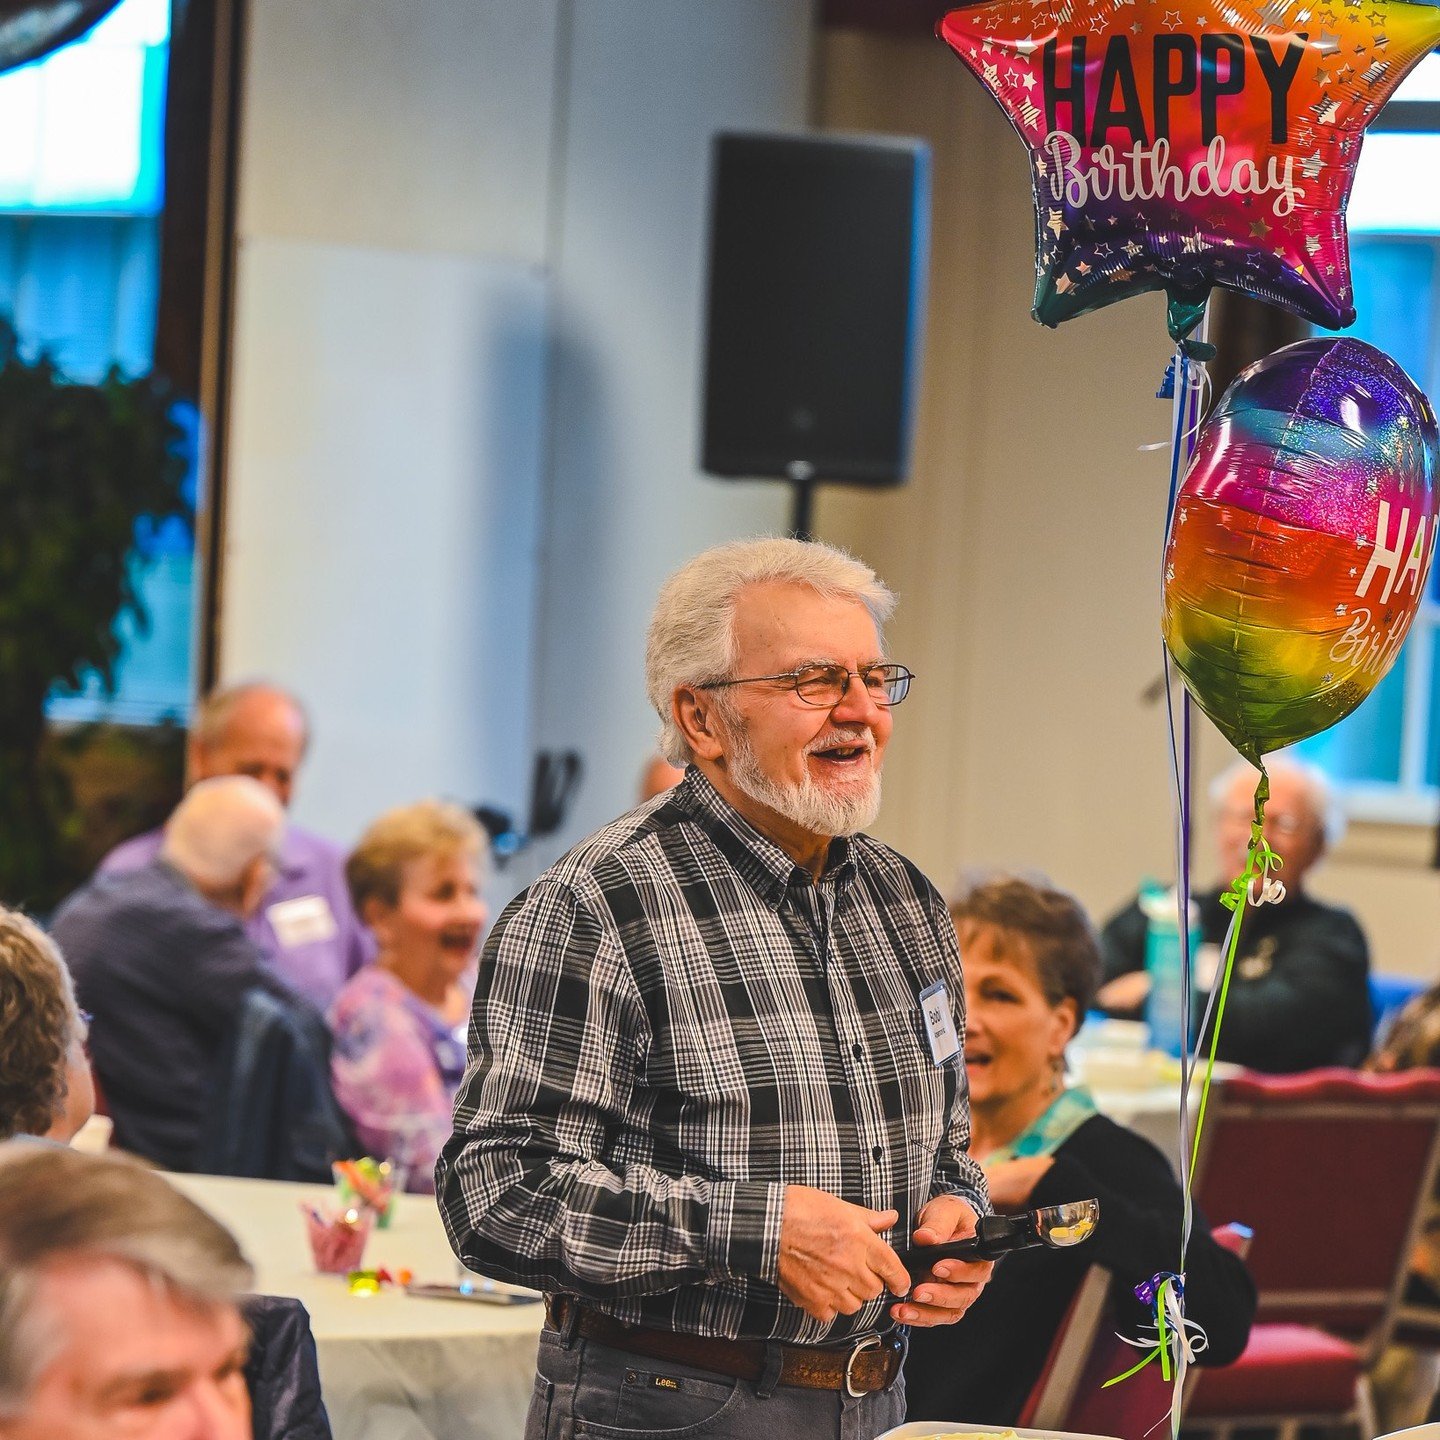 Family celebrates together, so last week the Bereans group threw one big birthday bash for the year. It was a BLAST! We absolutely love how this wonderful group does care and community so well.